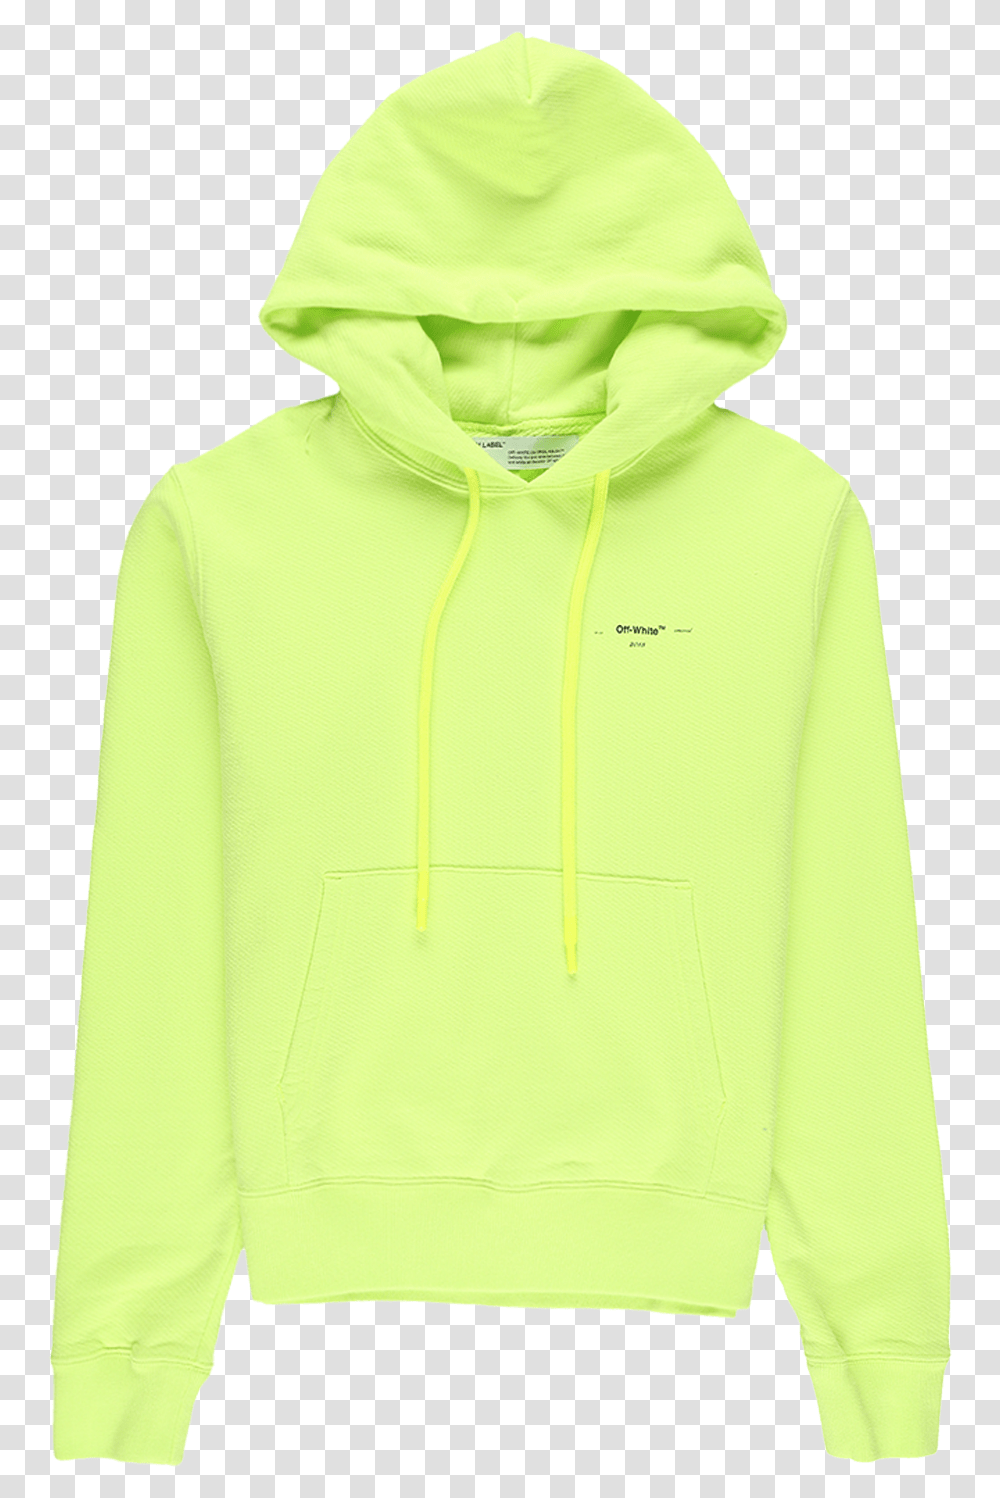 Off Solid, Clothing, Apparel, Sweatshirt, Sweater Transparent Png